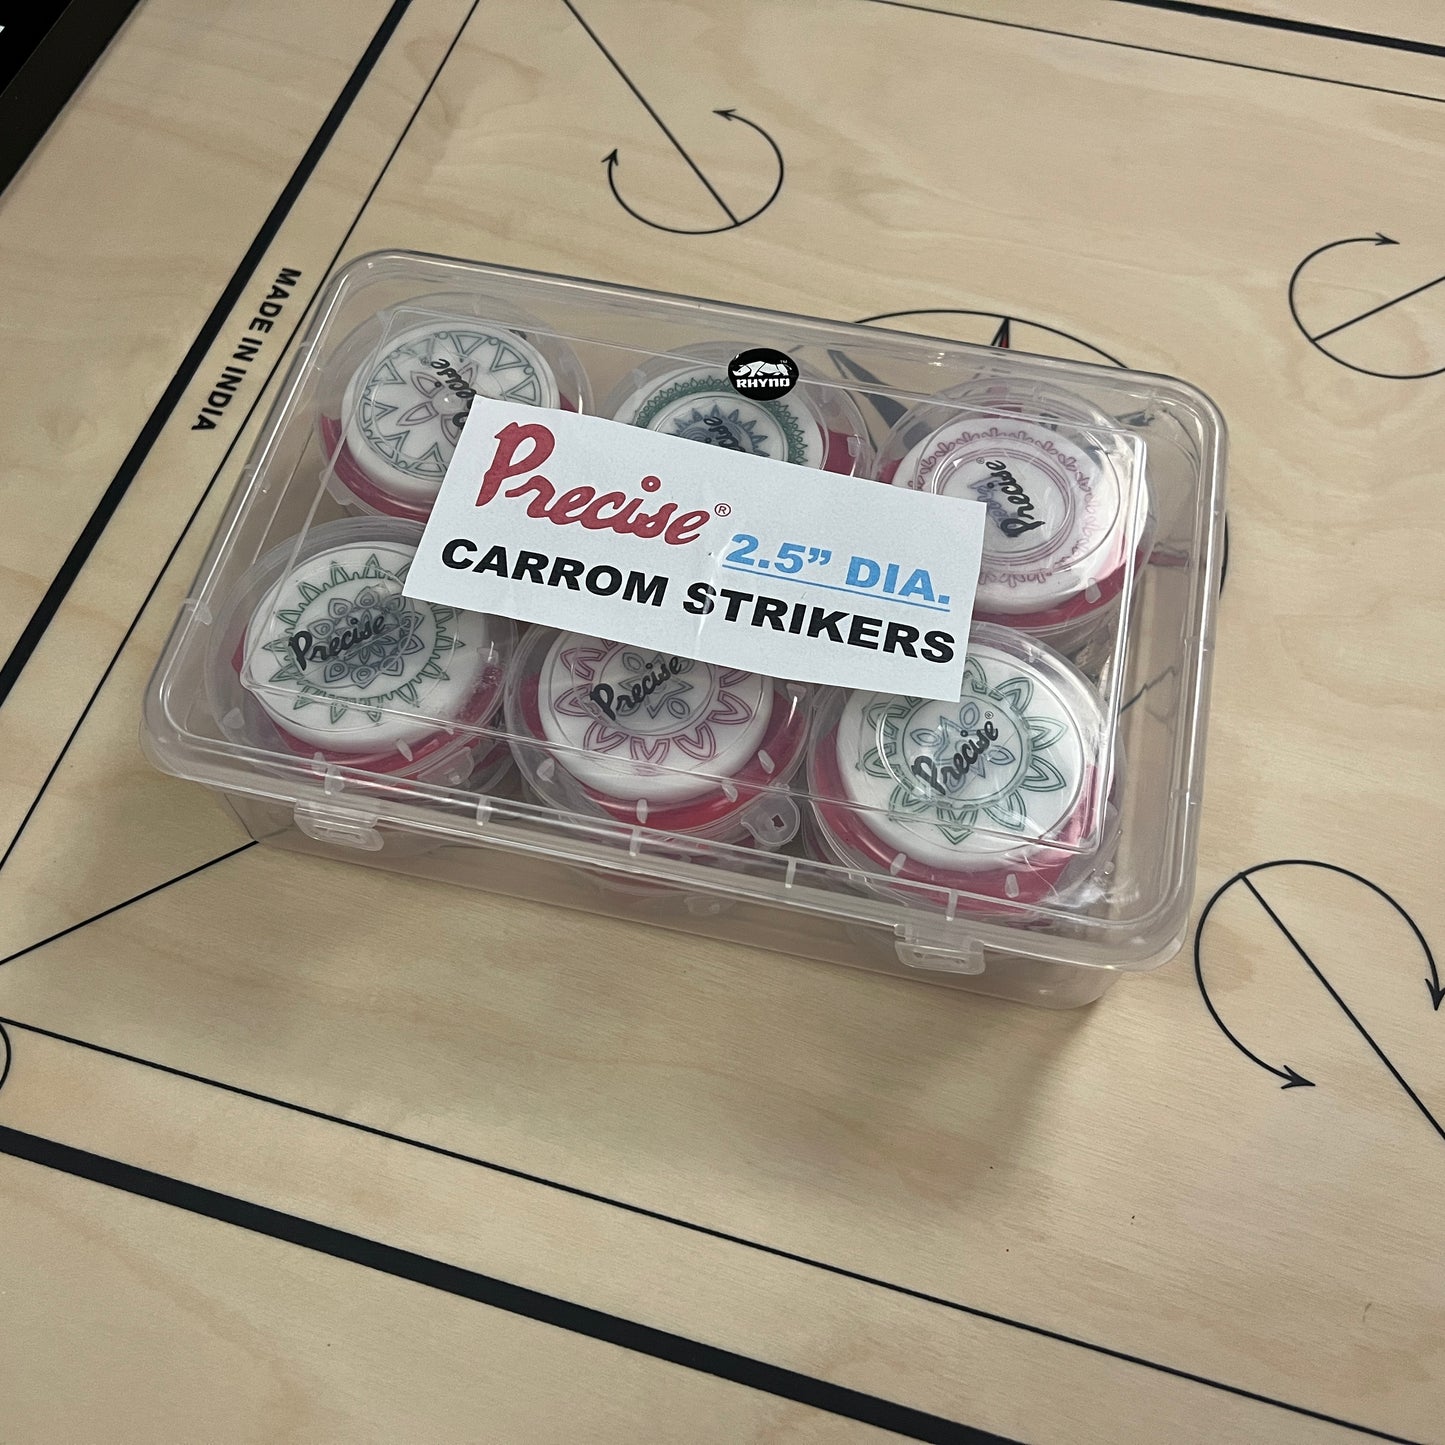 2.5 inch Precise carrom striker, weighing approximately 25 grams, designed for professional play, packed in a plastic box with a unique design, exclusively from Black Ash Sports.